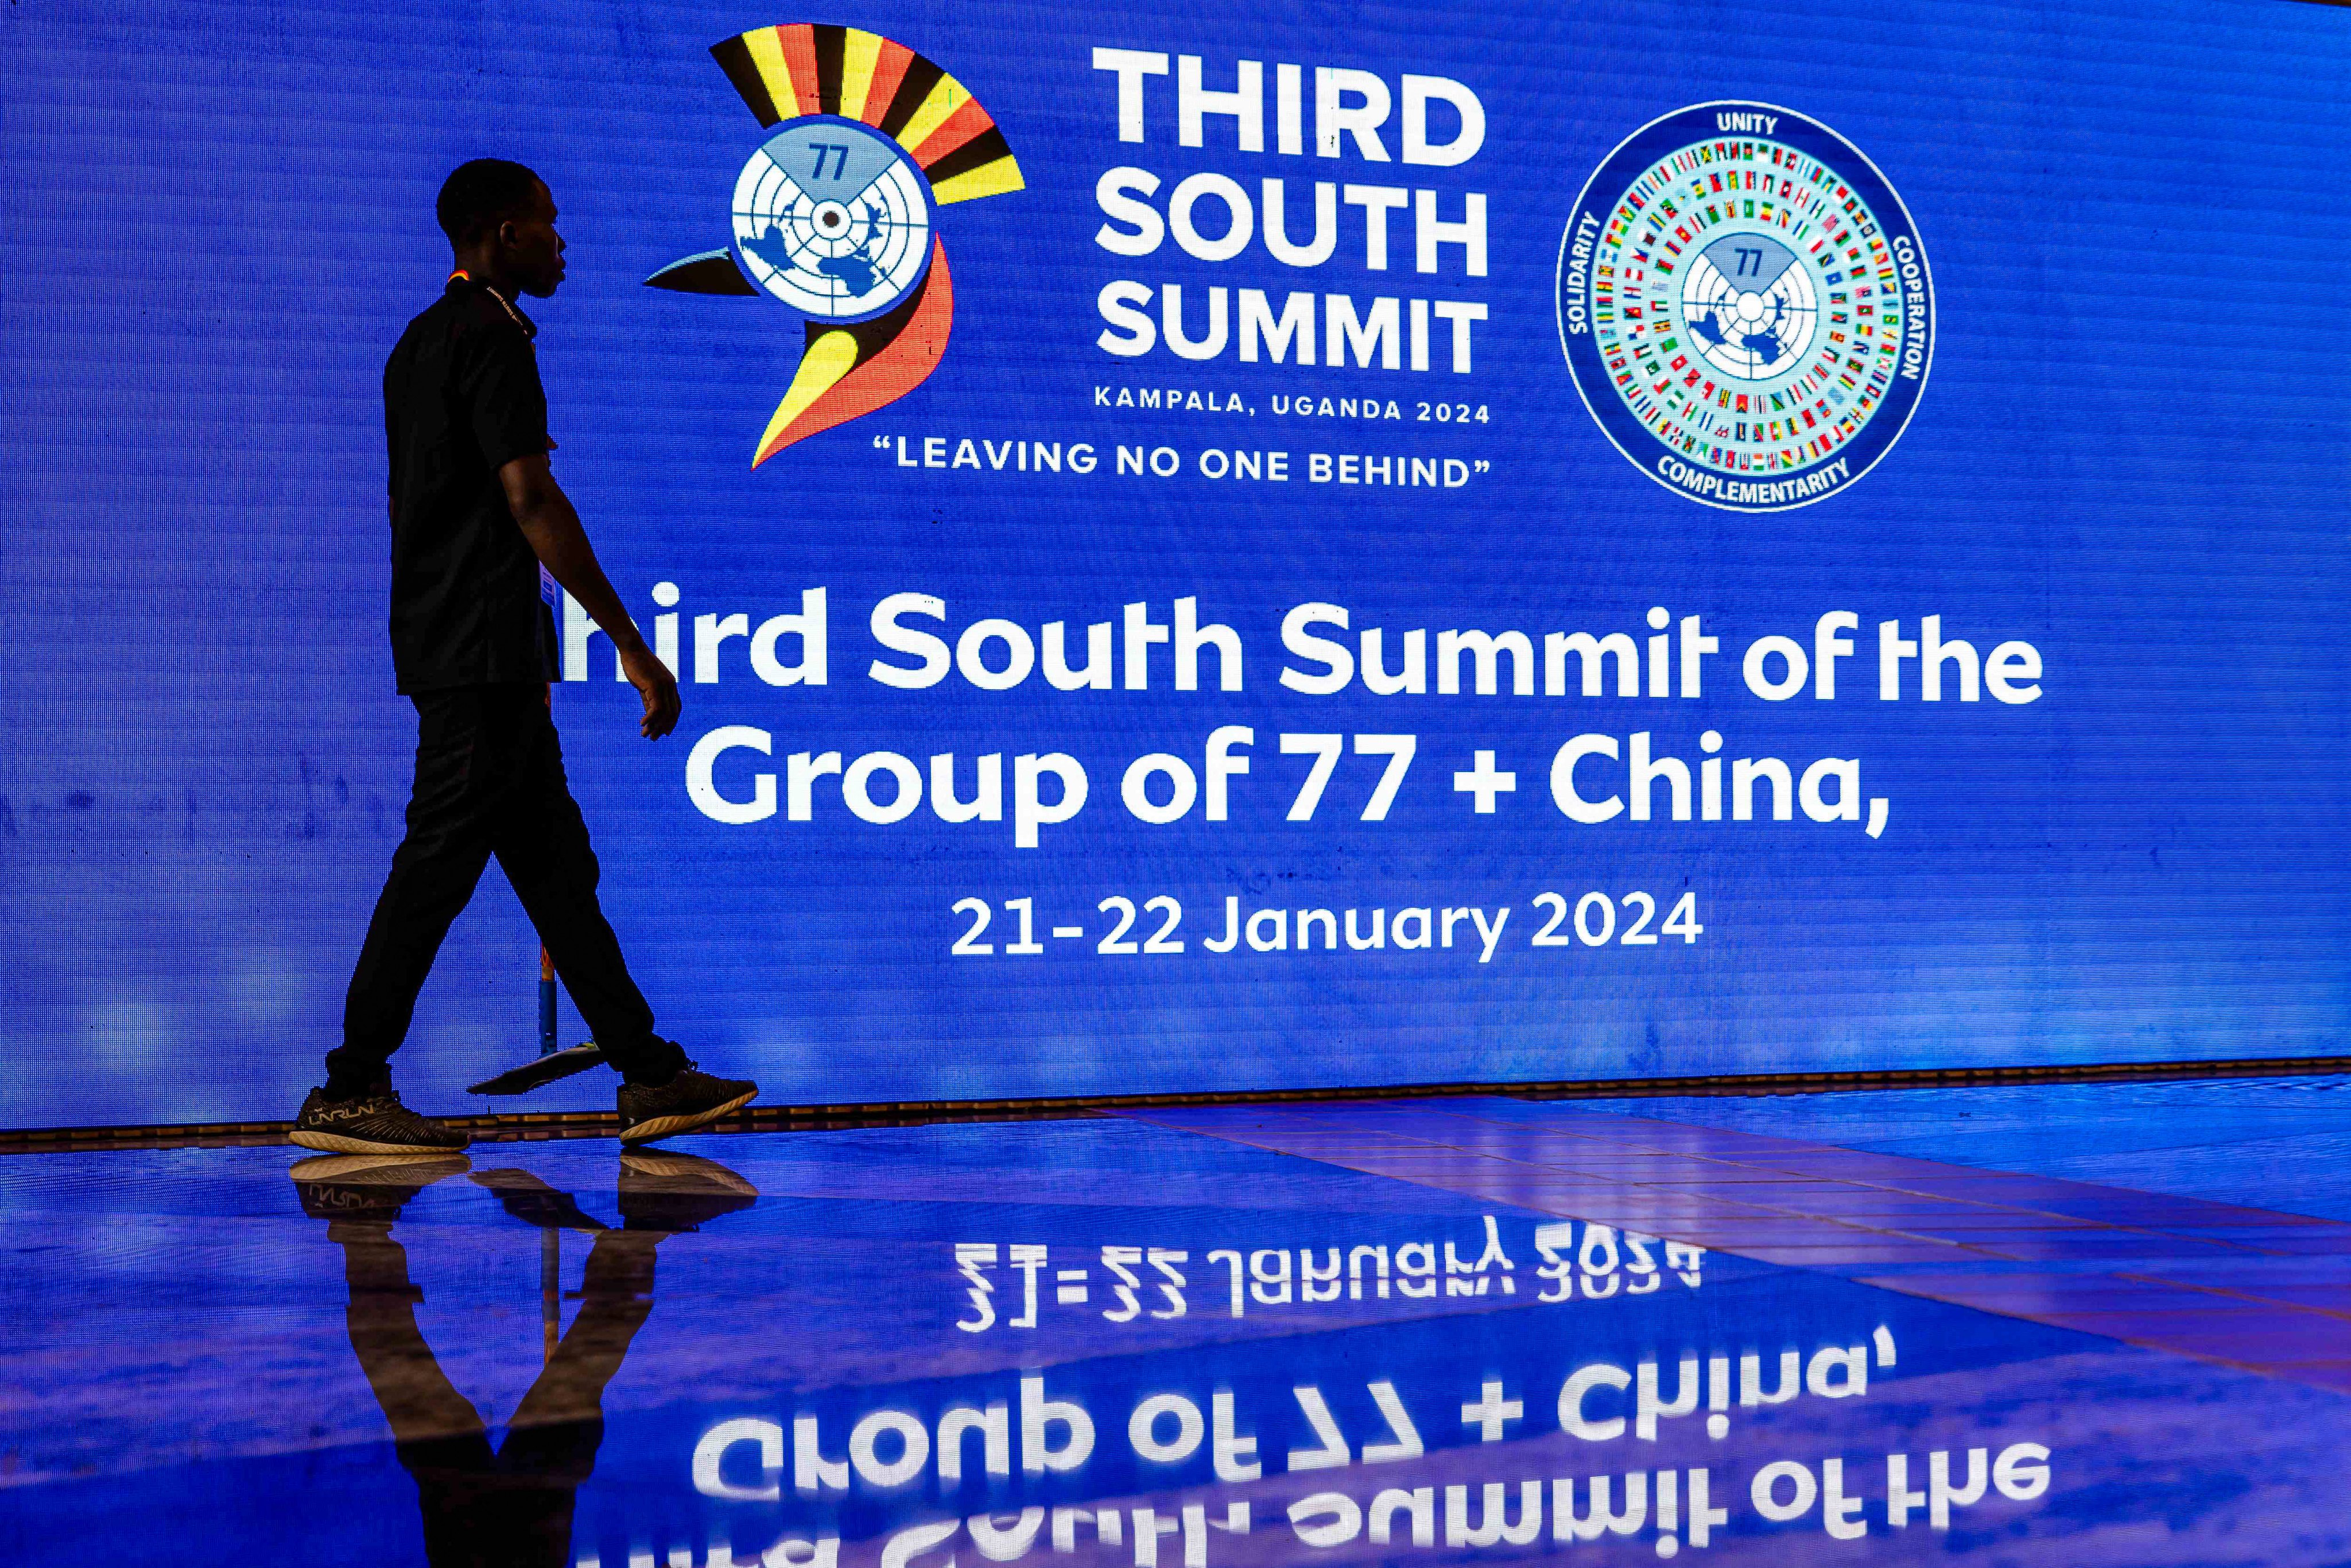 The G77 plus China, which is holding its third summit in Kampala, is a coalition of developing countries designed to promote its member states’ economic interests and create negotiating capacity in the United Nations. Photo: AFP